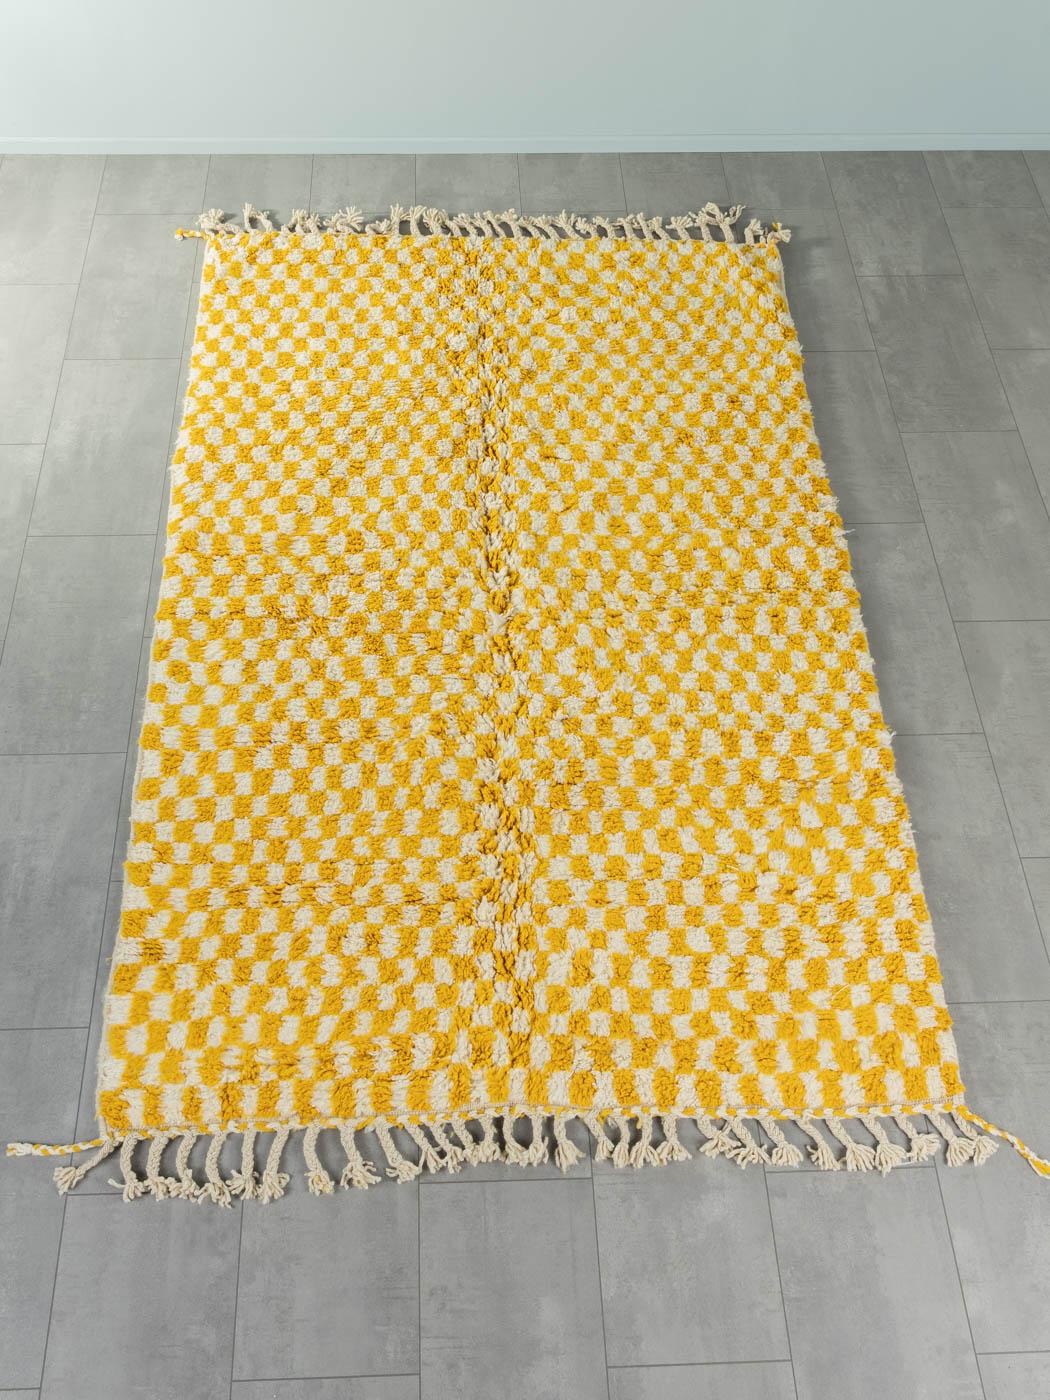 Tiny Lemon Check is a contemporary 100% wool rug – thick and soft, comfortable underfoot. Our Berber rugs are handwoven and handknotted by Amazigh women in the Atlas Mountains. These communities have been crafting rugs for thousands of years. One